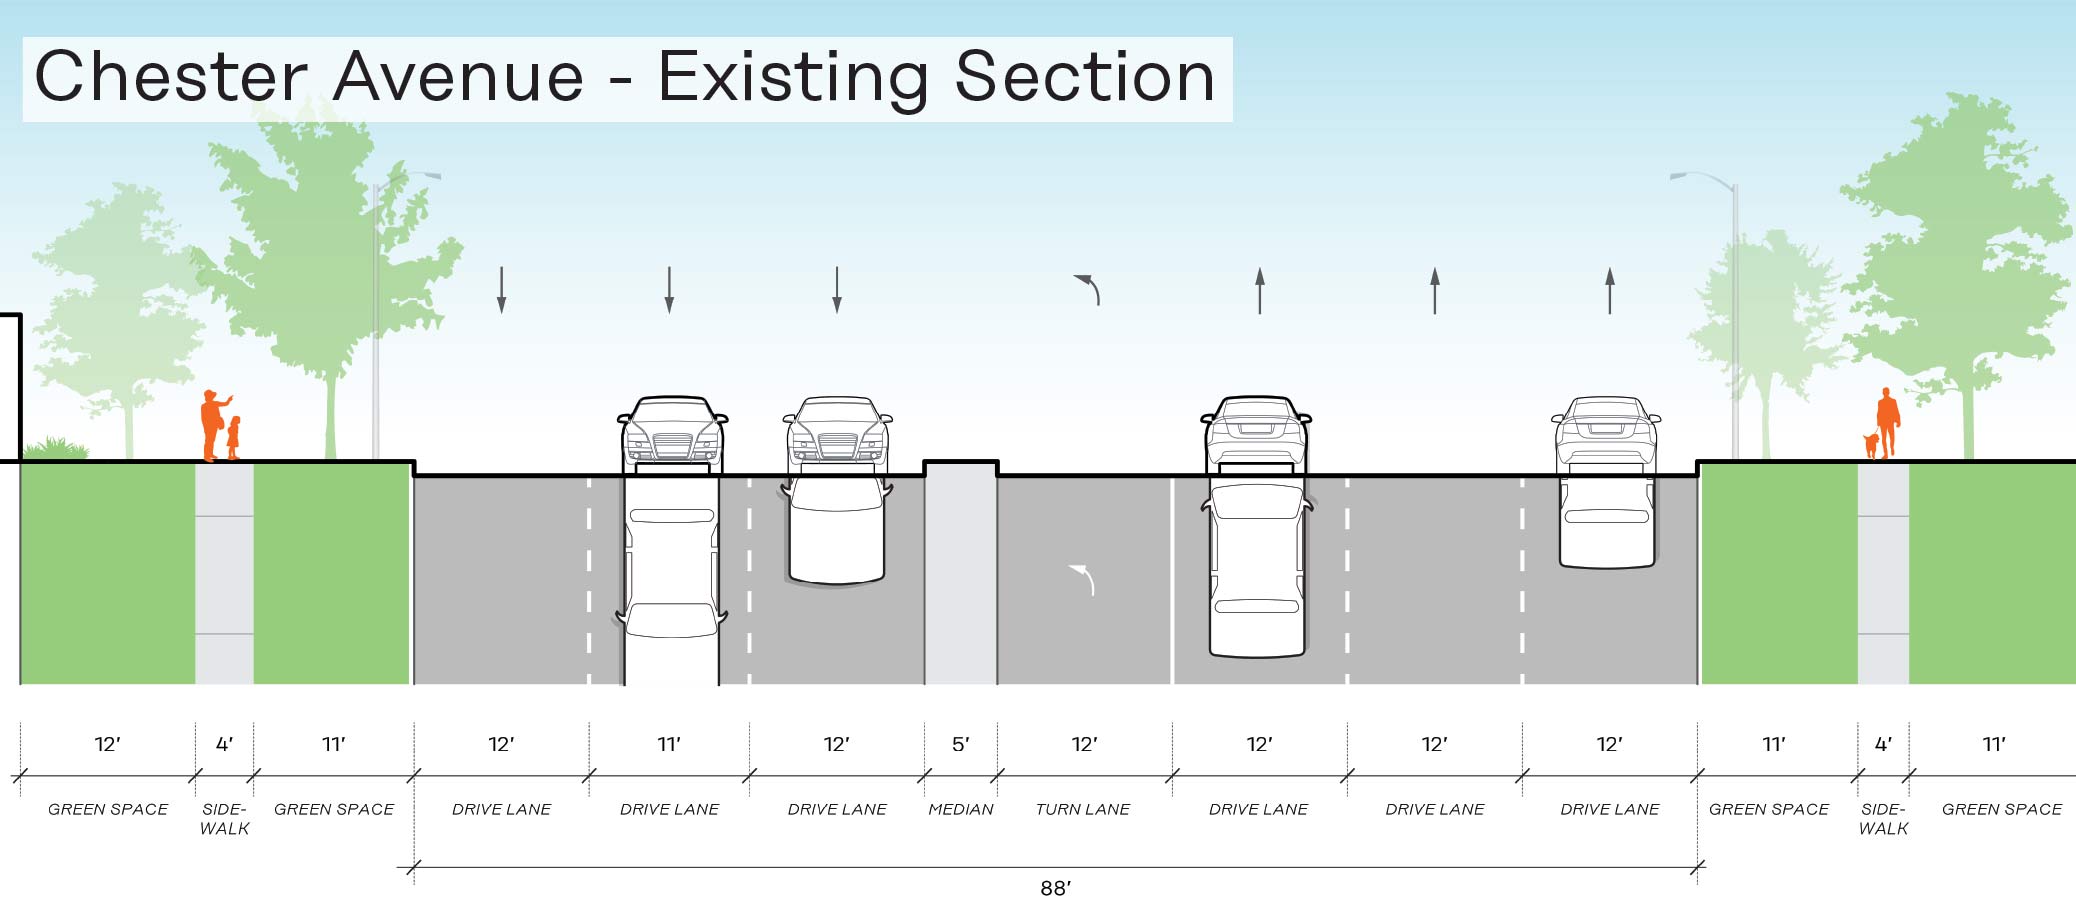 <span style="font-weight:700;">SEE MORE</span> | A CROSS-SECTION OF MIDTOWN'S STREETS